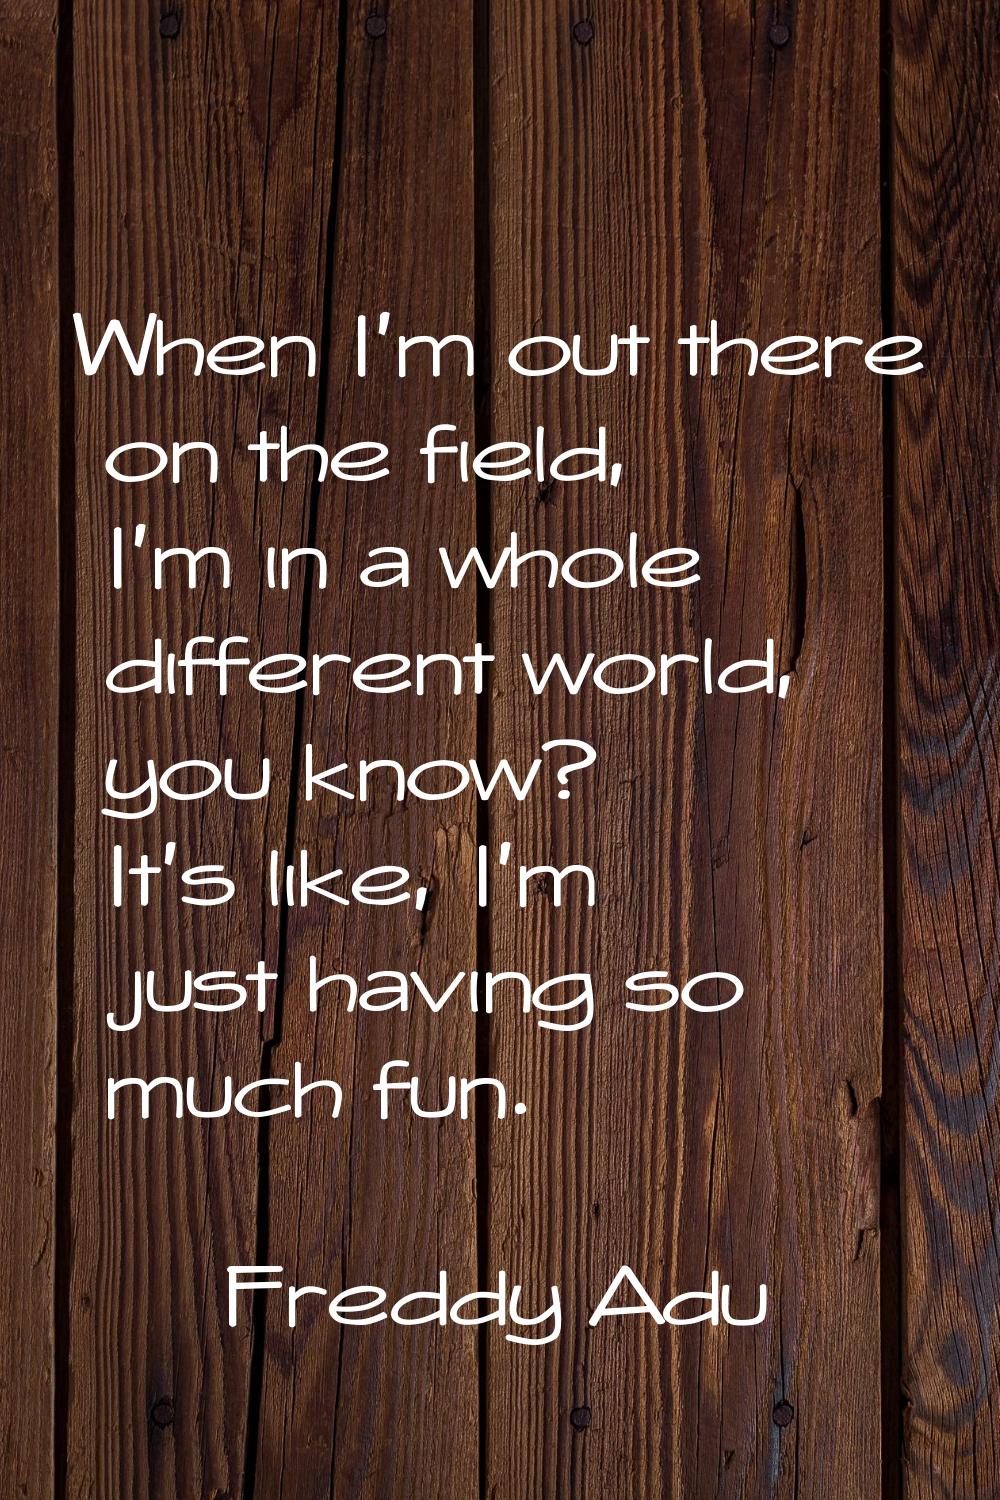 When I'm out there on the field, I'm in a whole different world, you know? It's like, I'm just havi